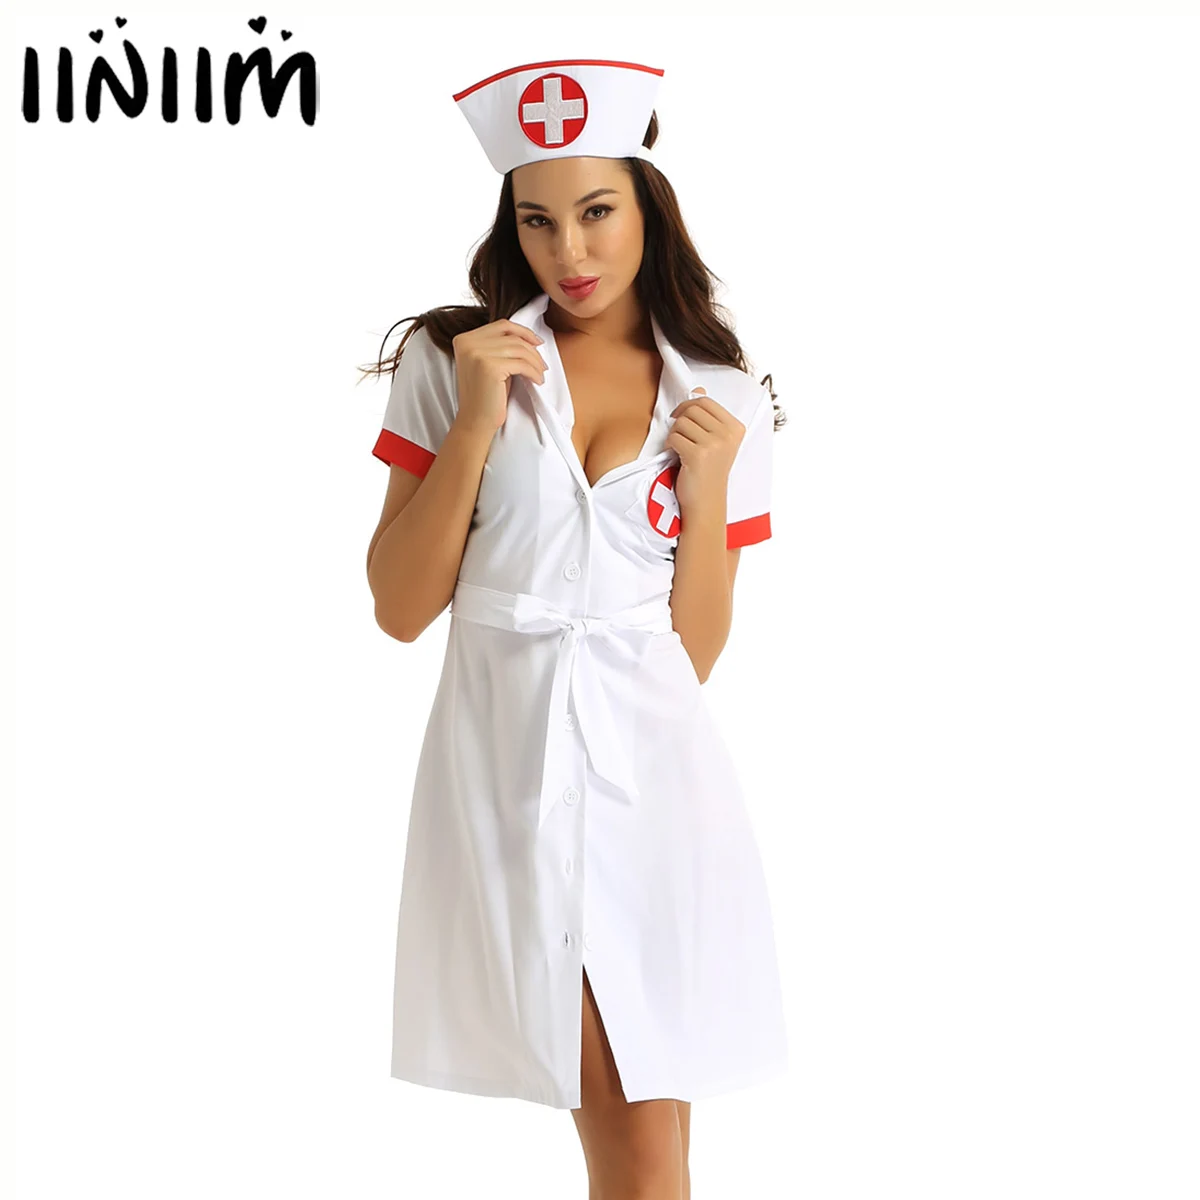 Erotic Halloween Fancy Cosplay Costumes Women Naughty Lingerie Sexy Nurse Dress with Belt Hat Uniform Outfit Party Kinky Costume